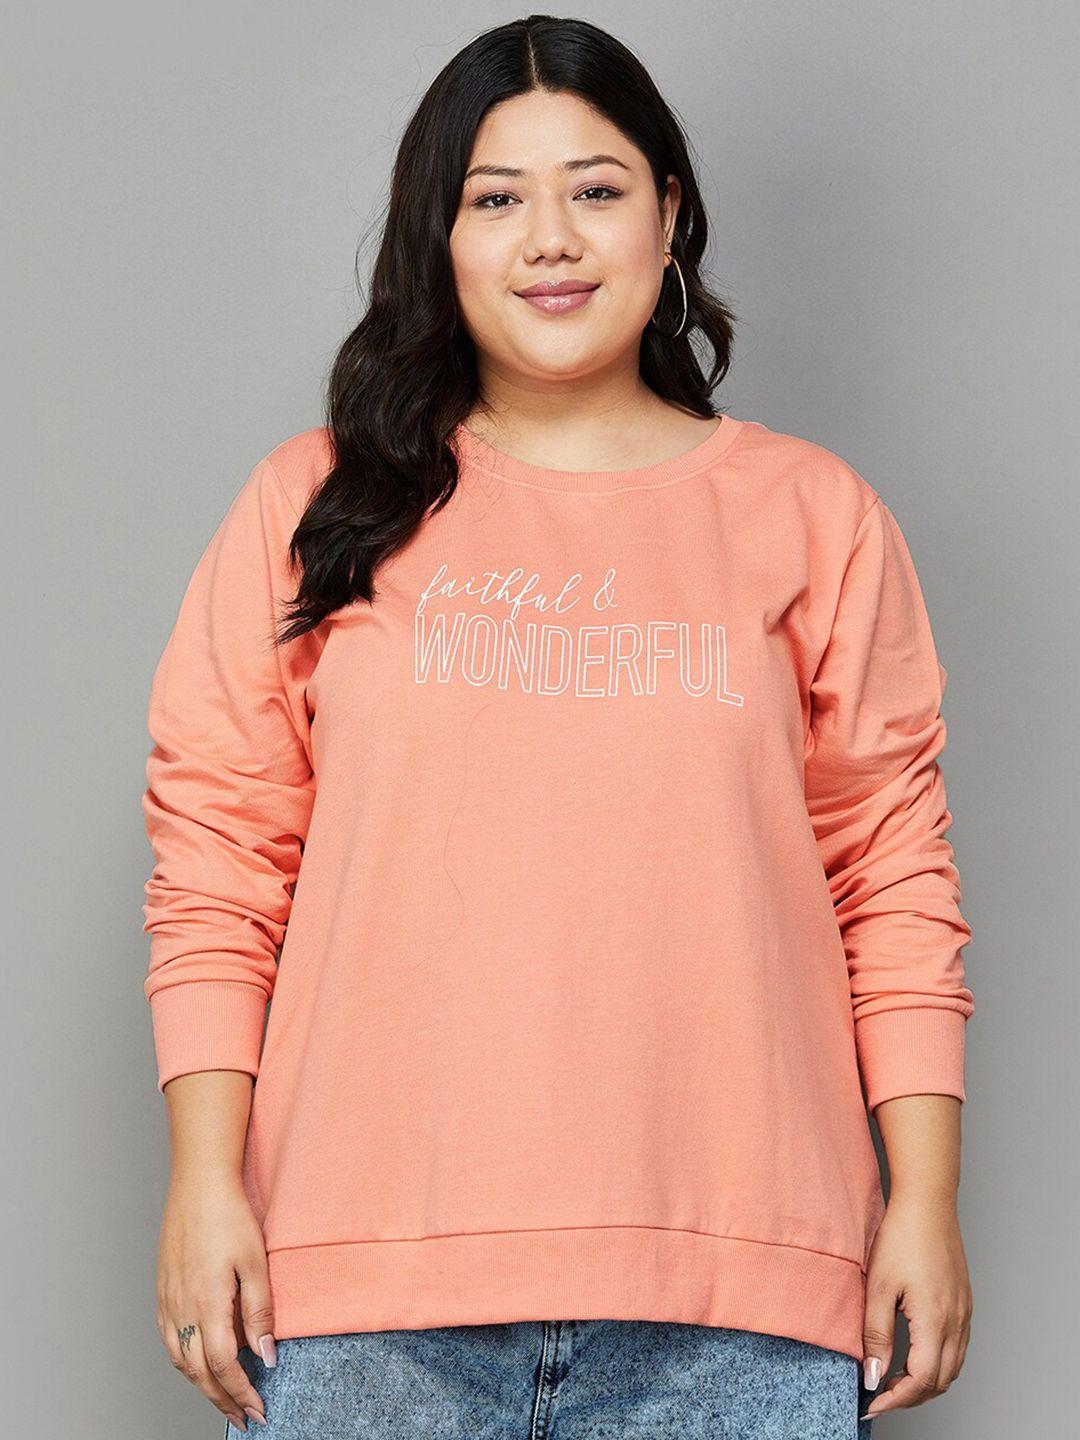 nexus-by-lifestyle-plus-size-typography-printed-cotton-pullover